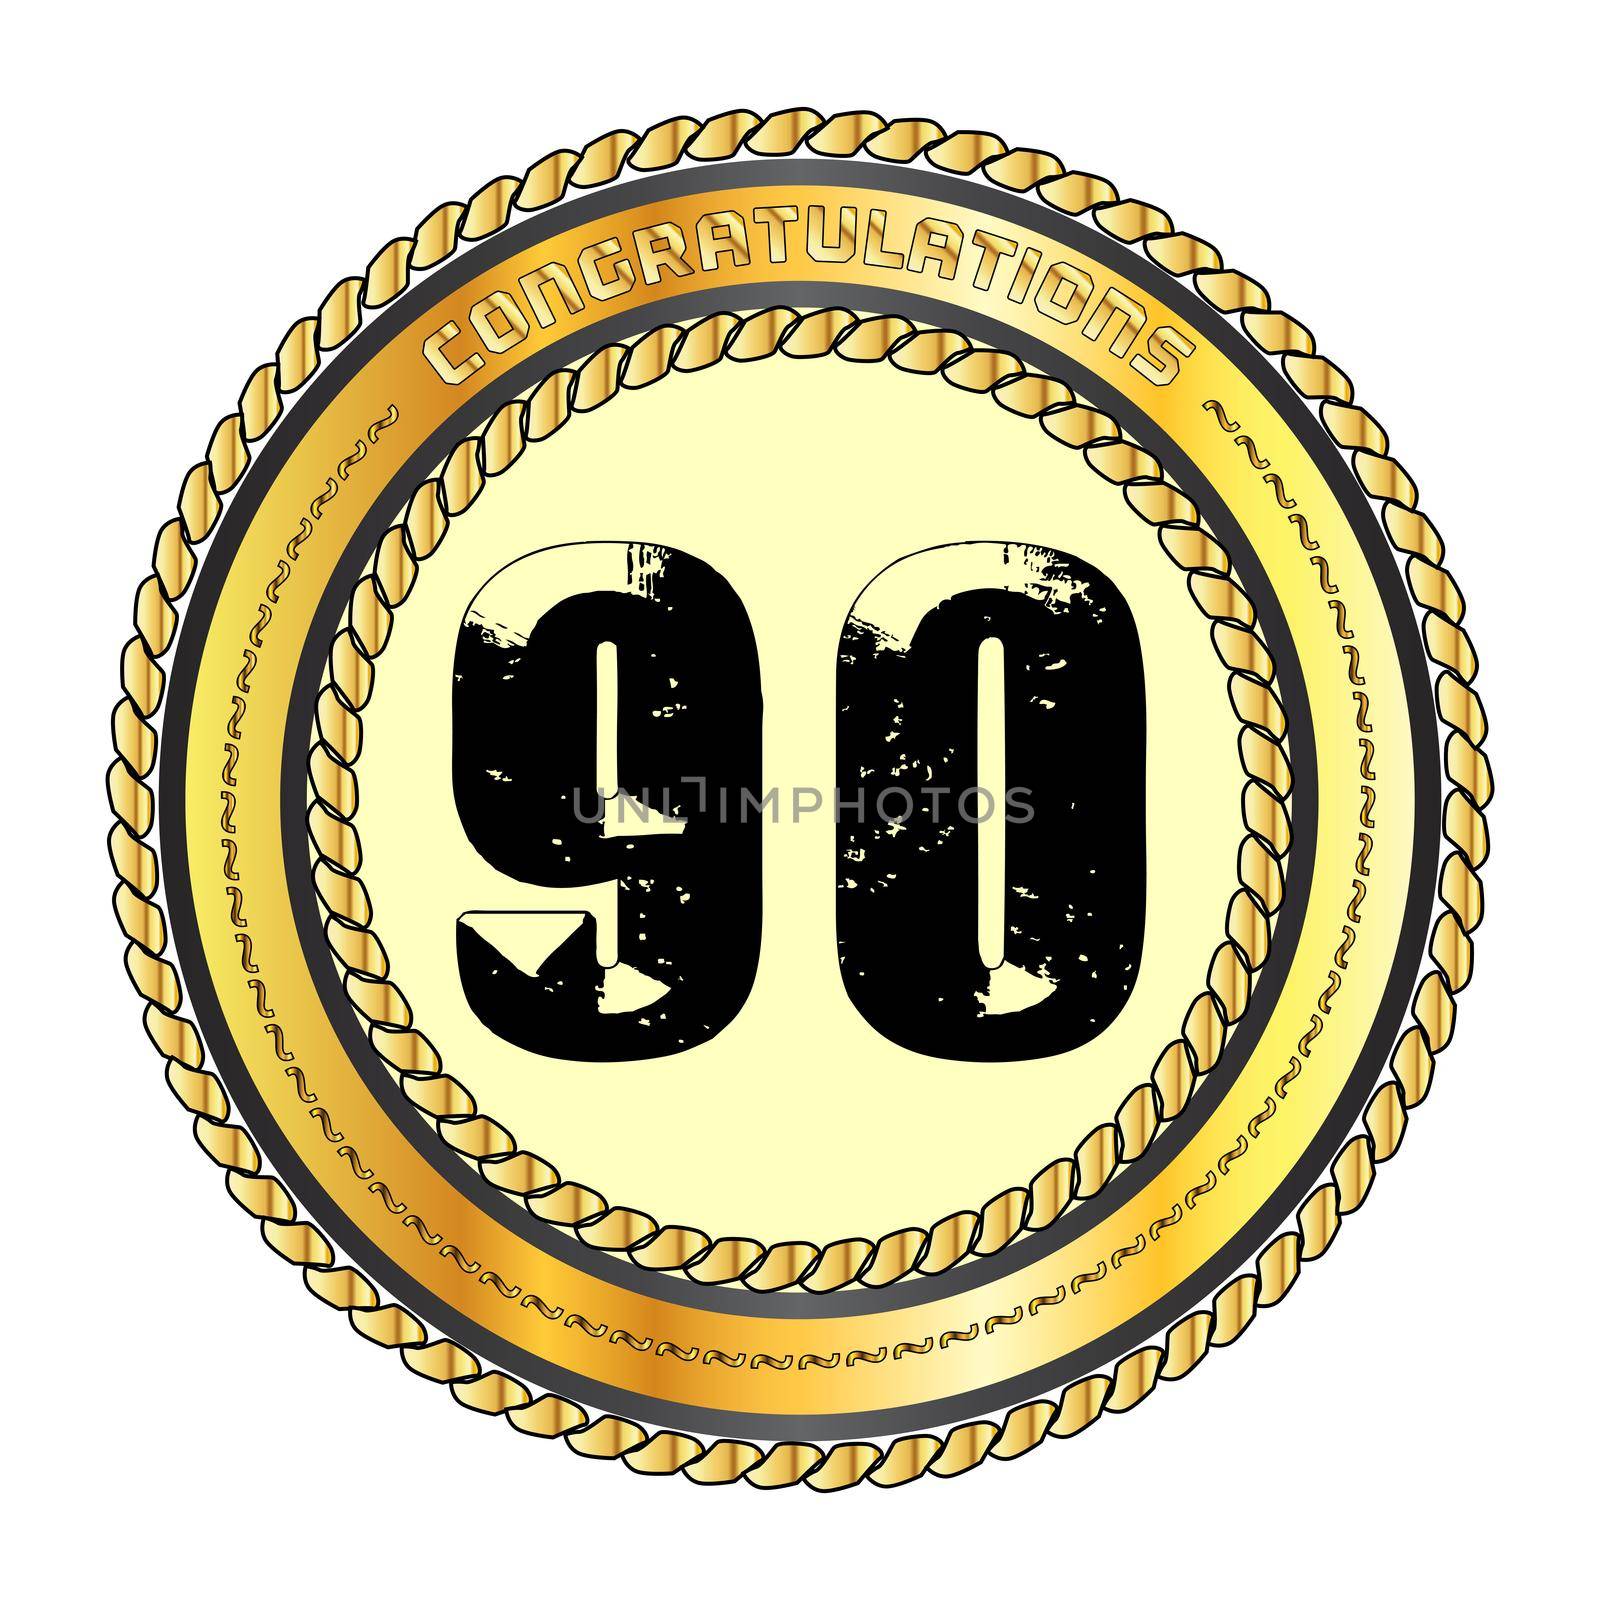 A golden 90 metal rope circular border over a white background